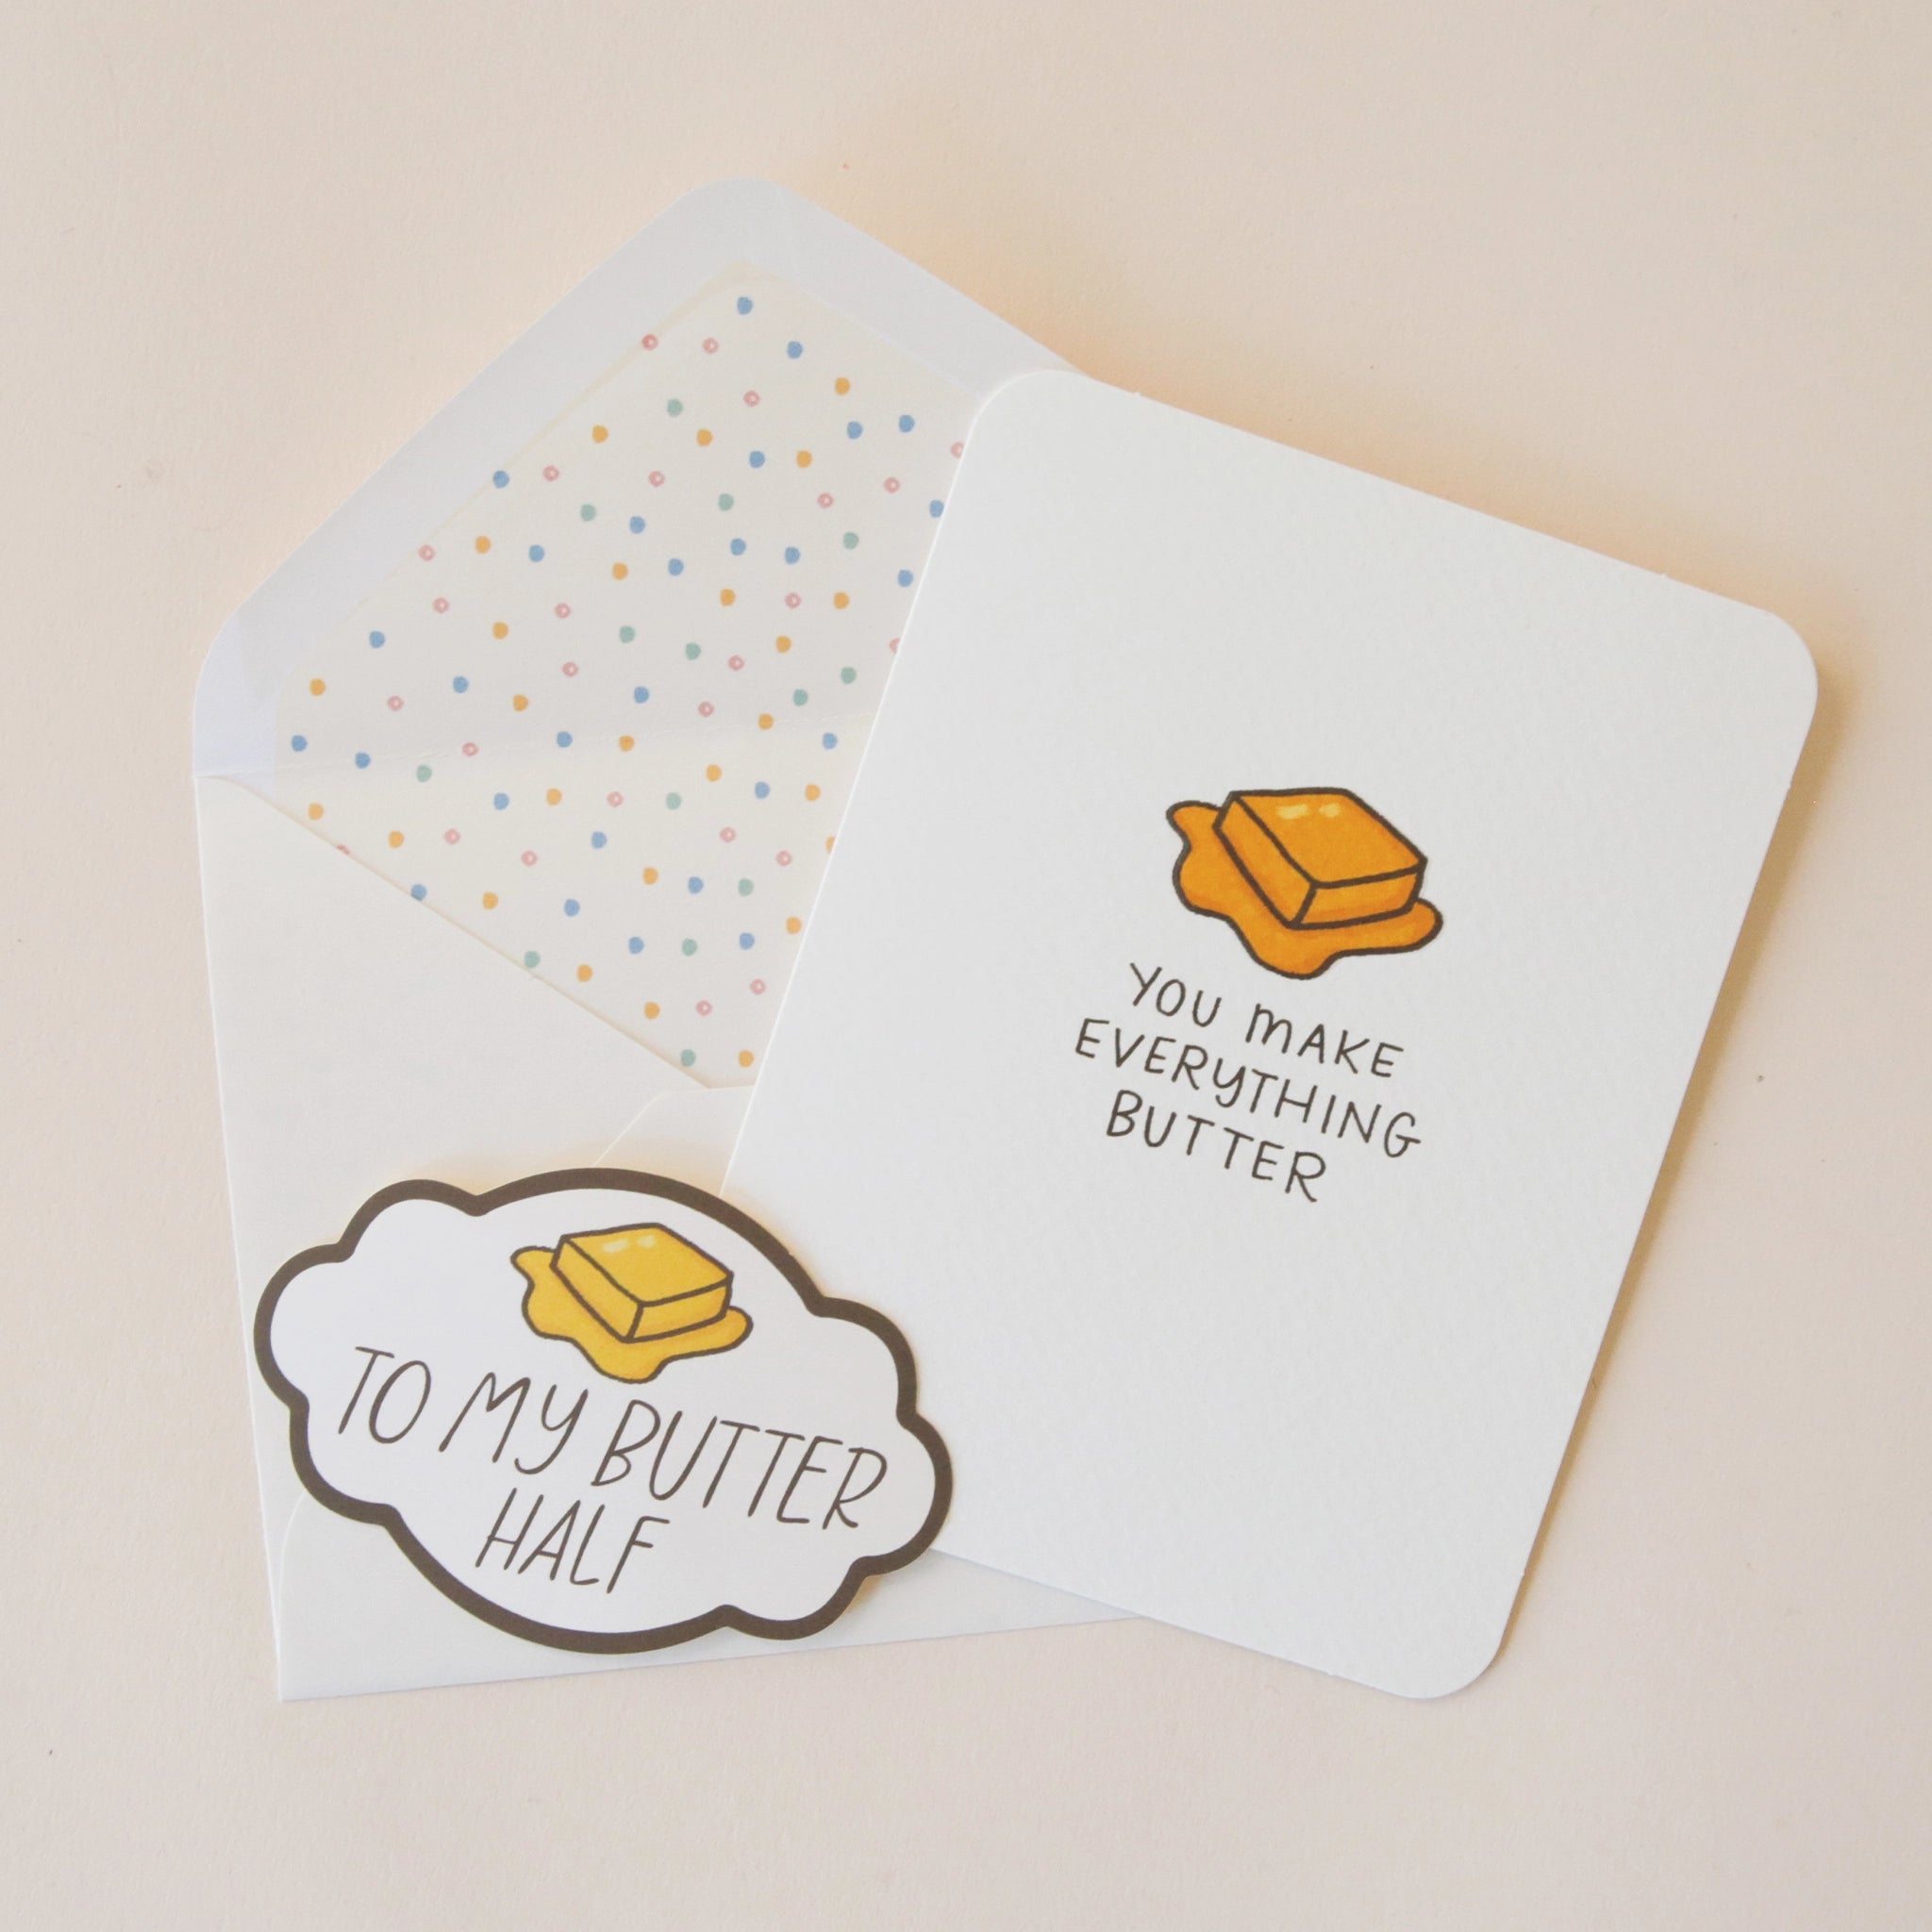 A white card with a slice of yellow butter graphic and black text that reads &quot;You Make Everything Butter&quot; along with a coordinating sticker that is included and has bubble edges and has a similar butter illustration and says, &quot;To My Butter Half&quot;.